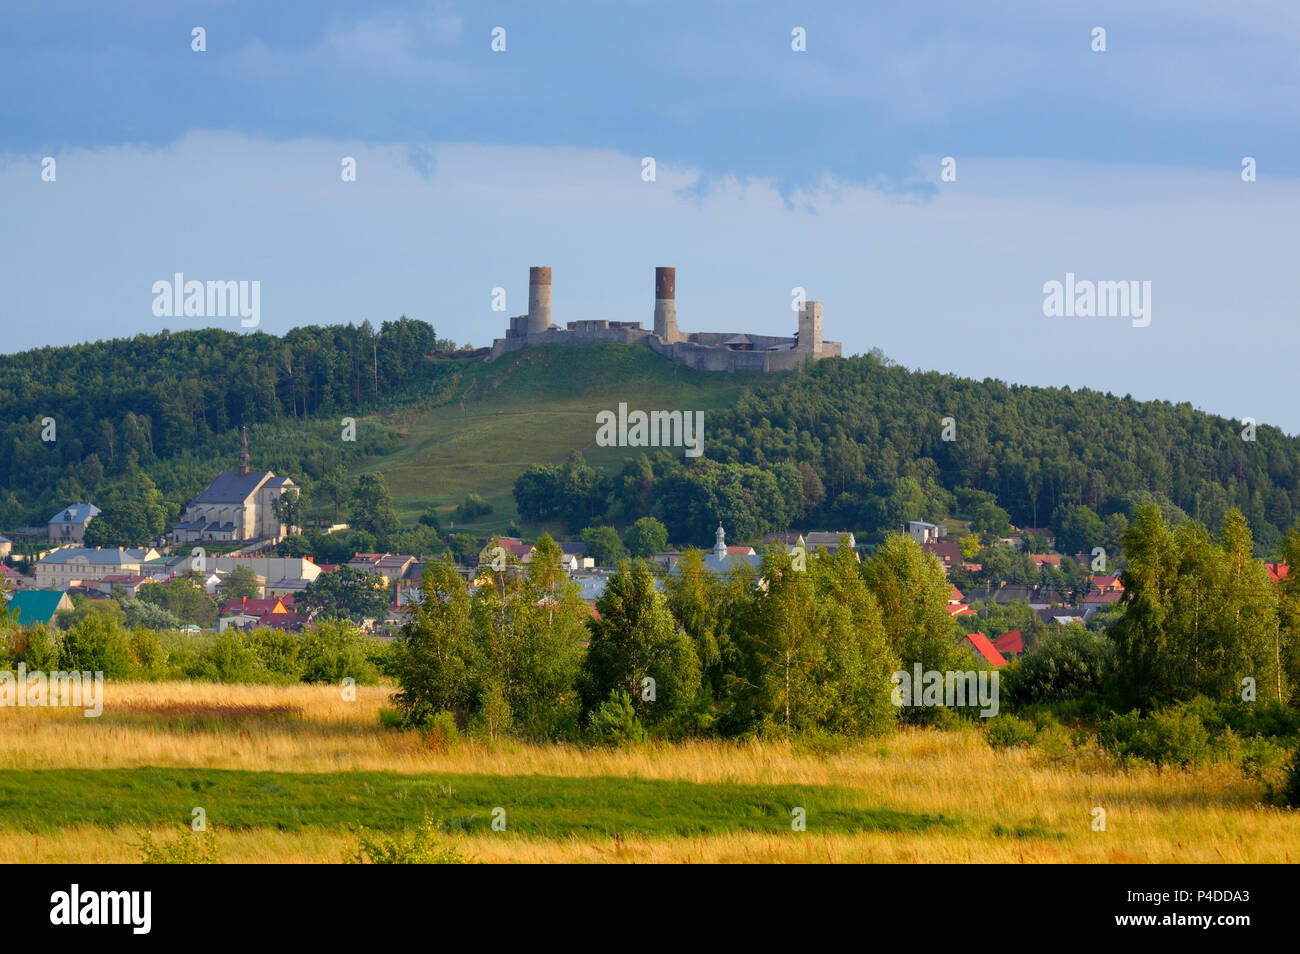 View of a Checiny with Royal Castle (from late 13th century) on hill over town. Poland, Checiny, The Holy Cross Mountains. Stock Photo